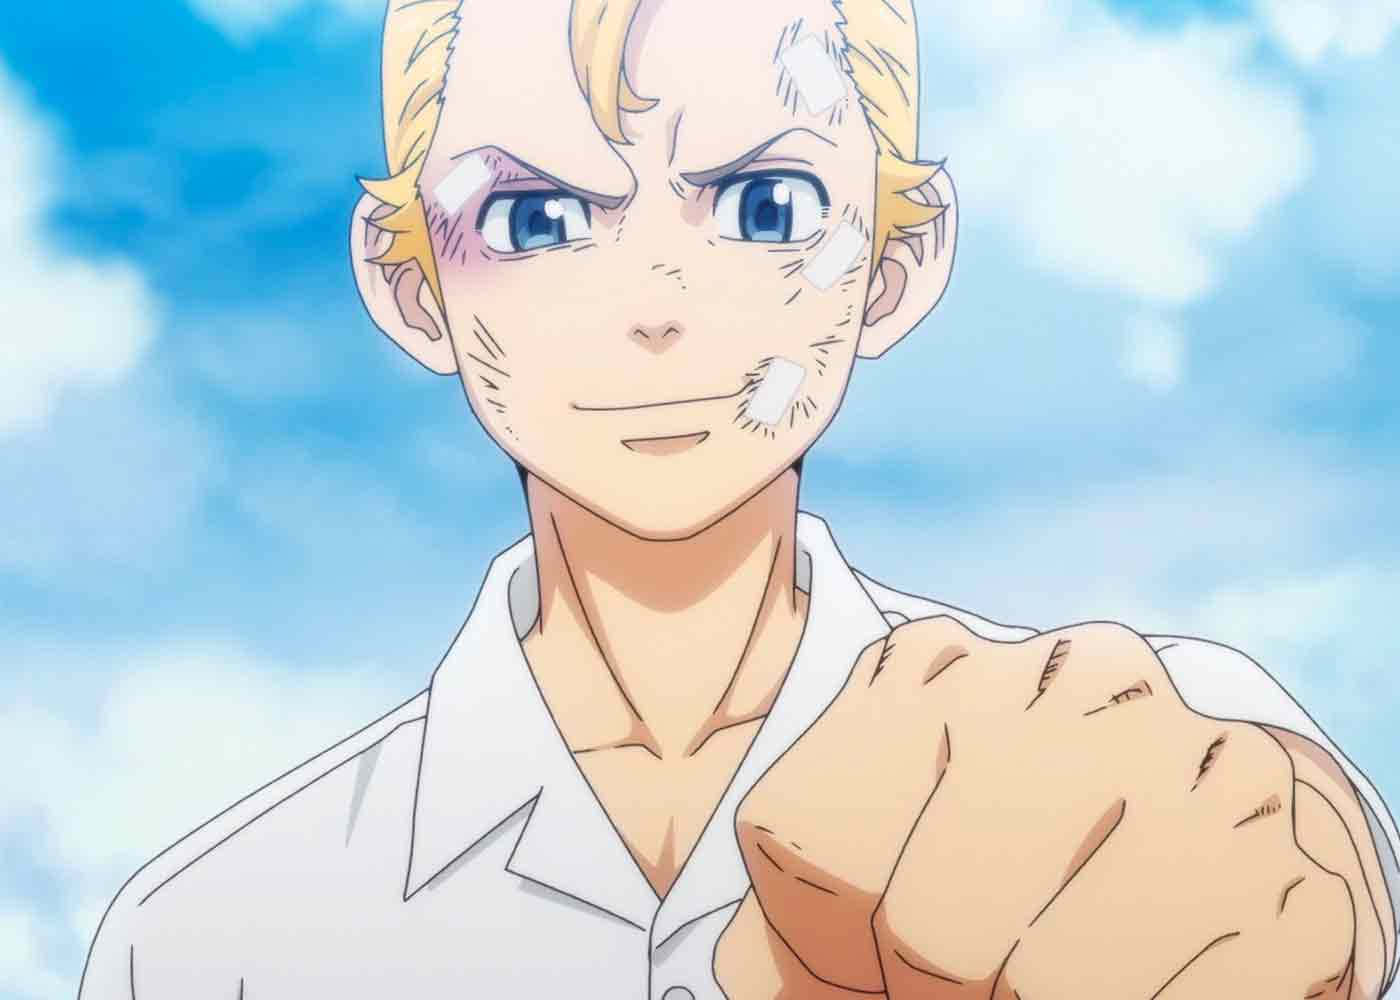 A Man With Blond Hair And Blue Eyes Is Pointing His Fist